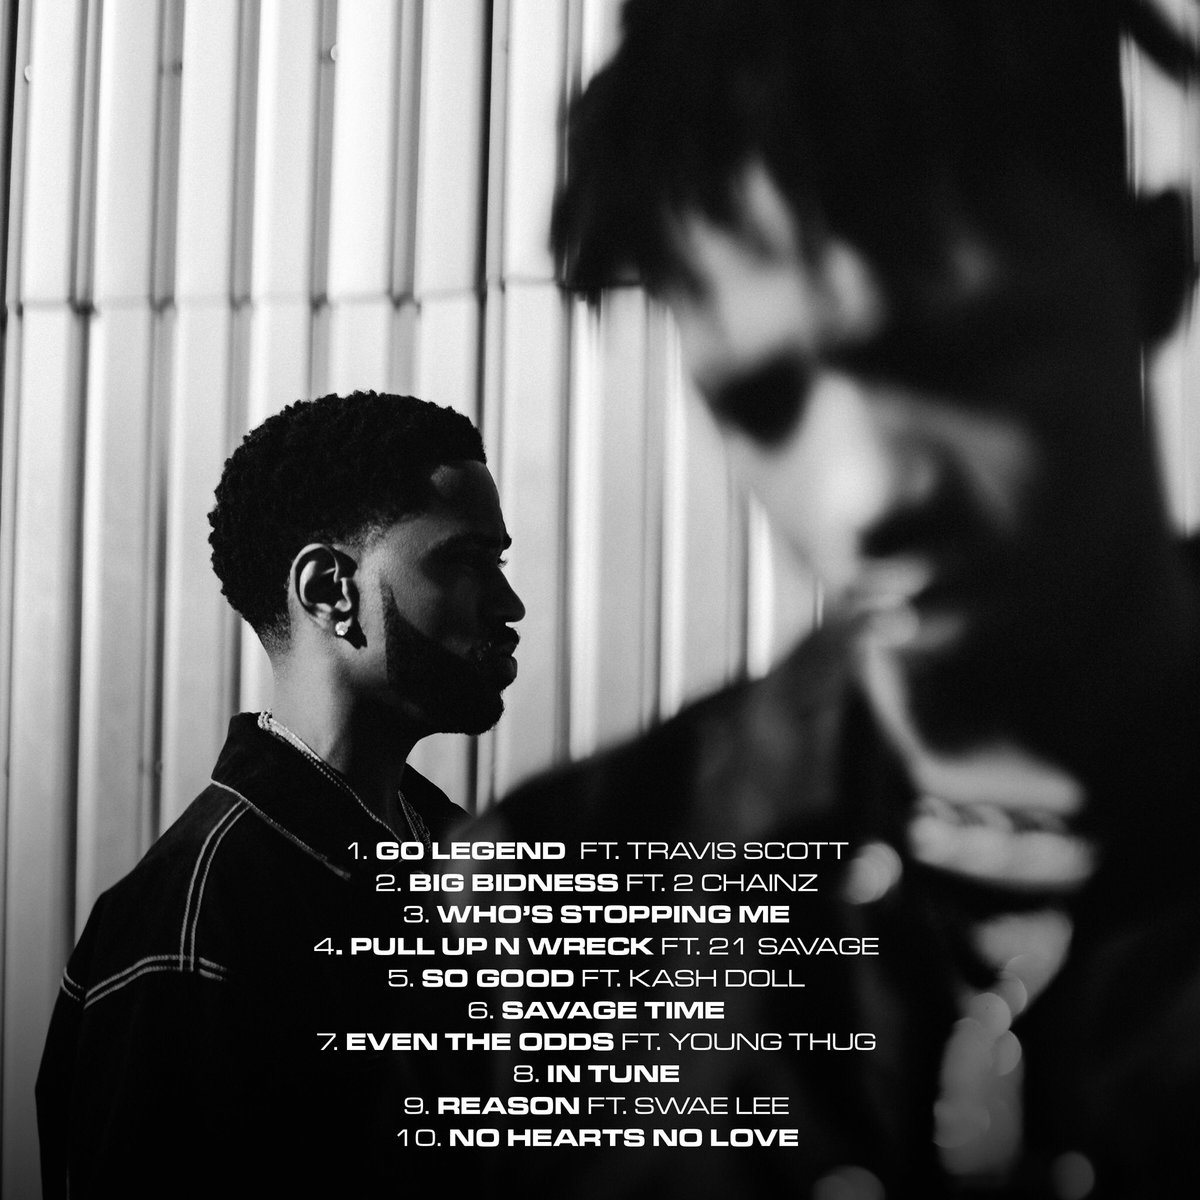 Big Sean and Metro Boomin fumble on 'Double Or Nothing': Album review